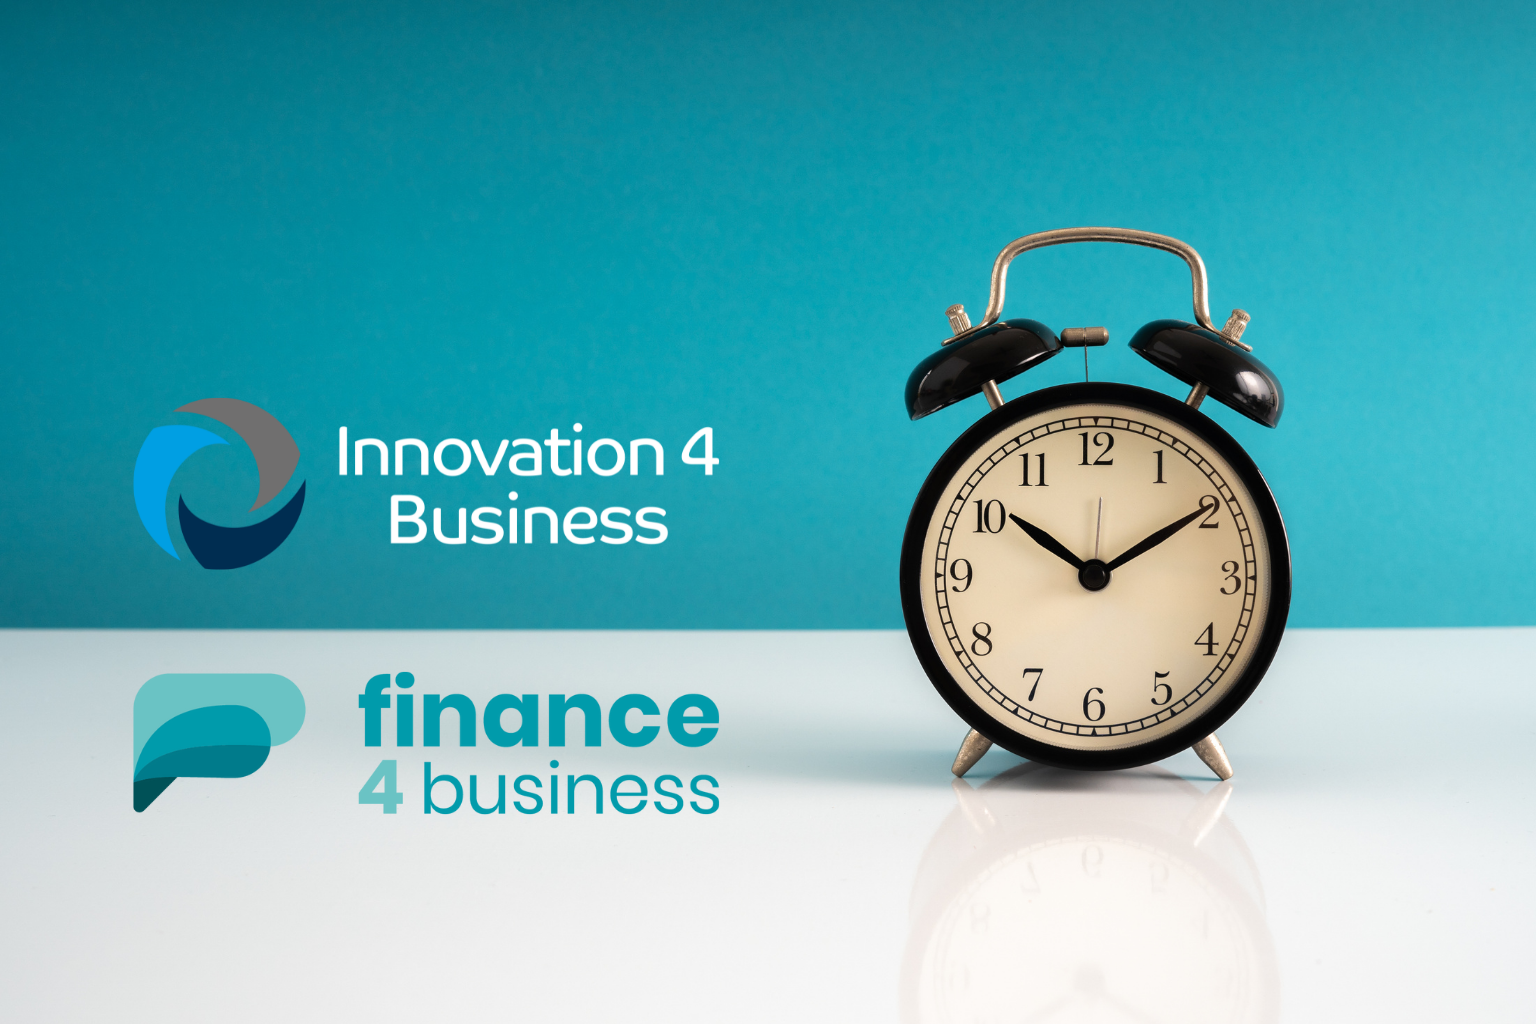 When it comes to needing business finance, timing is of the essence